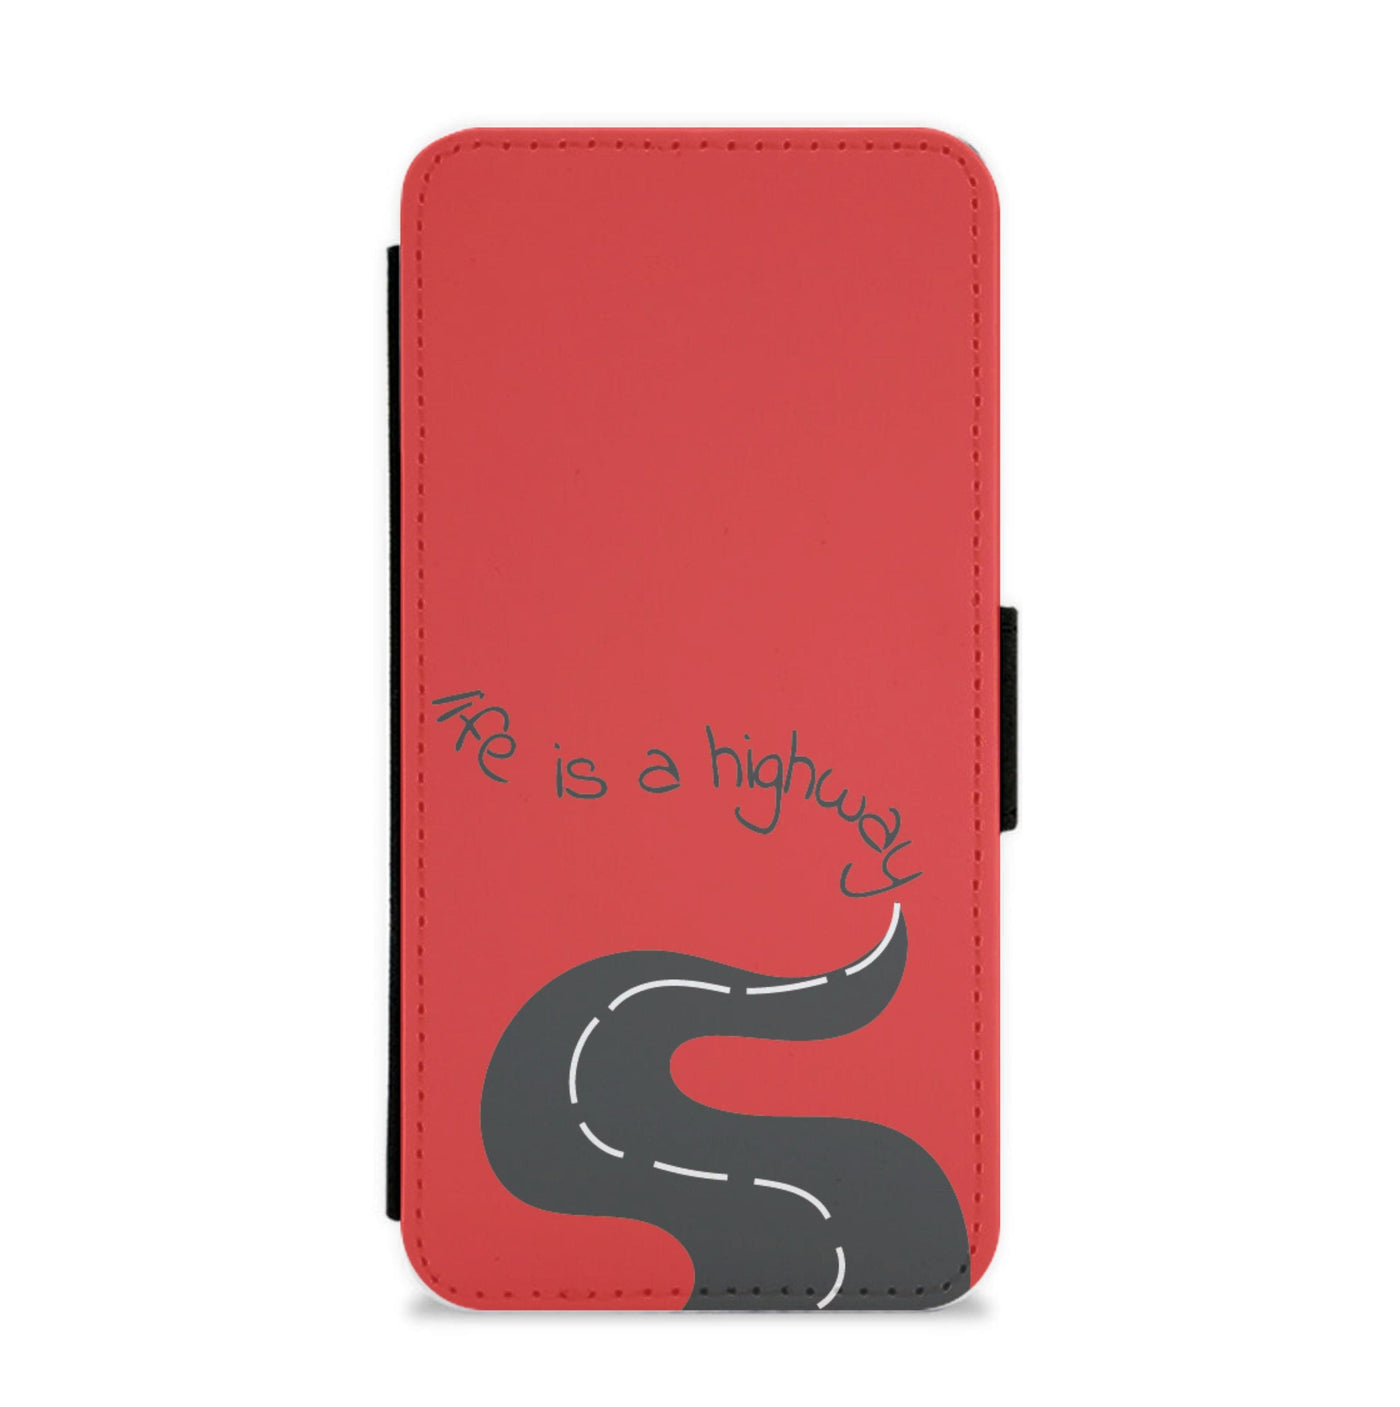 Life Is A Highway - Cars Flip / Wallet Phone Case